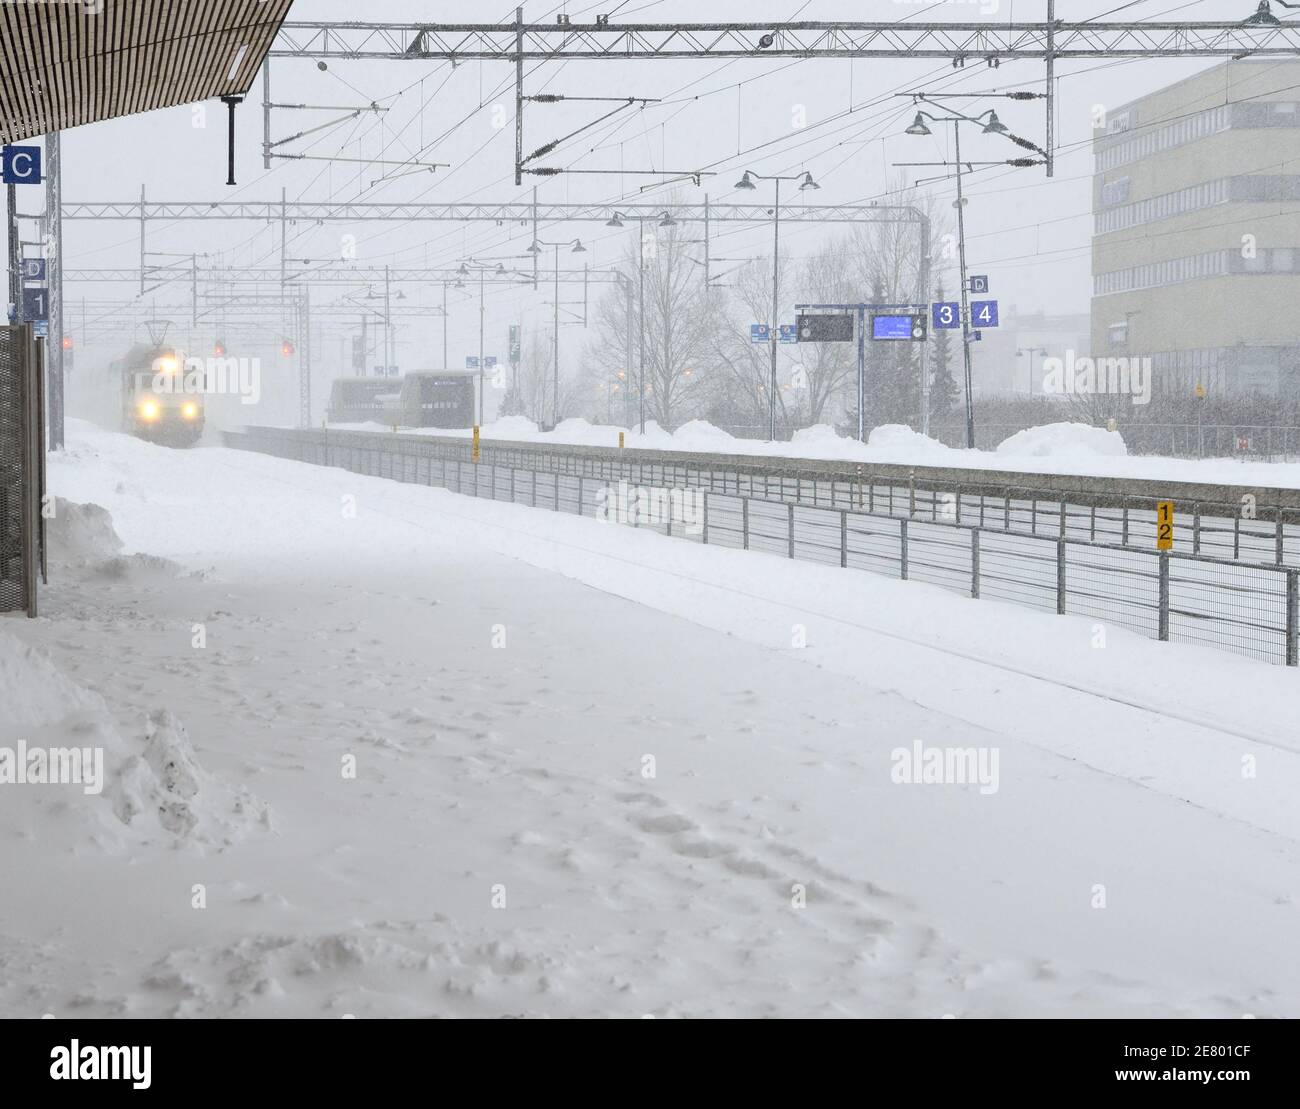 the train arrives at the station during a snow storm Stock Photo